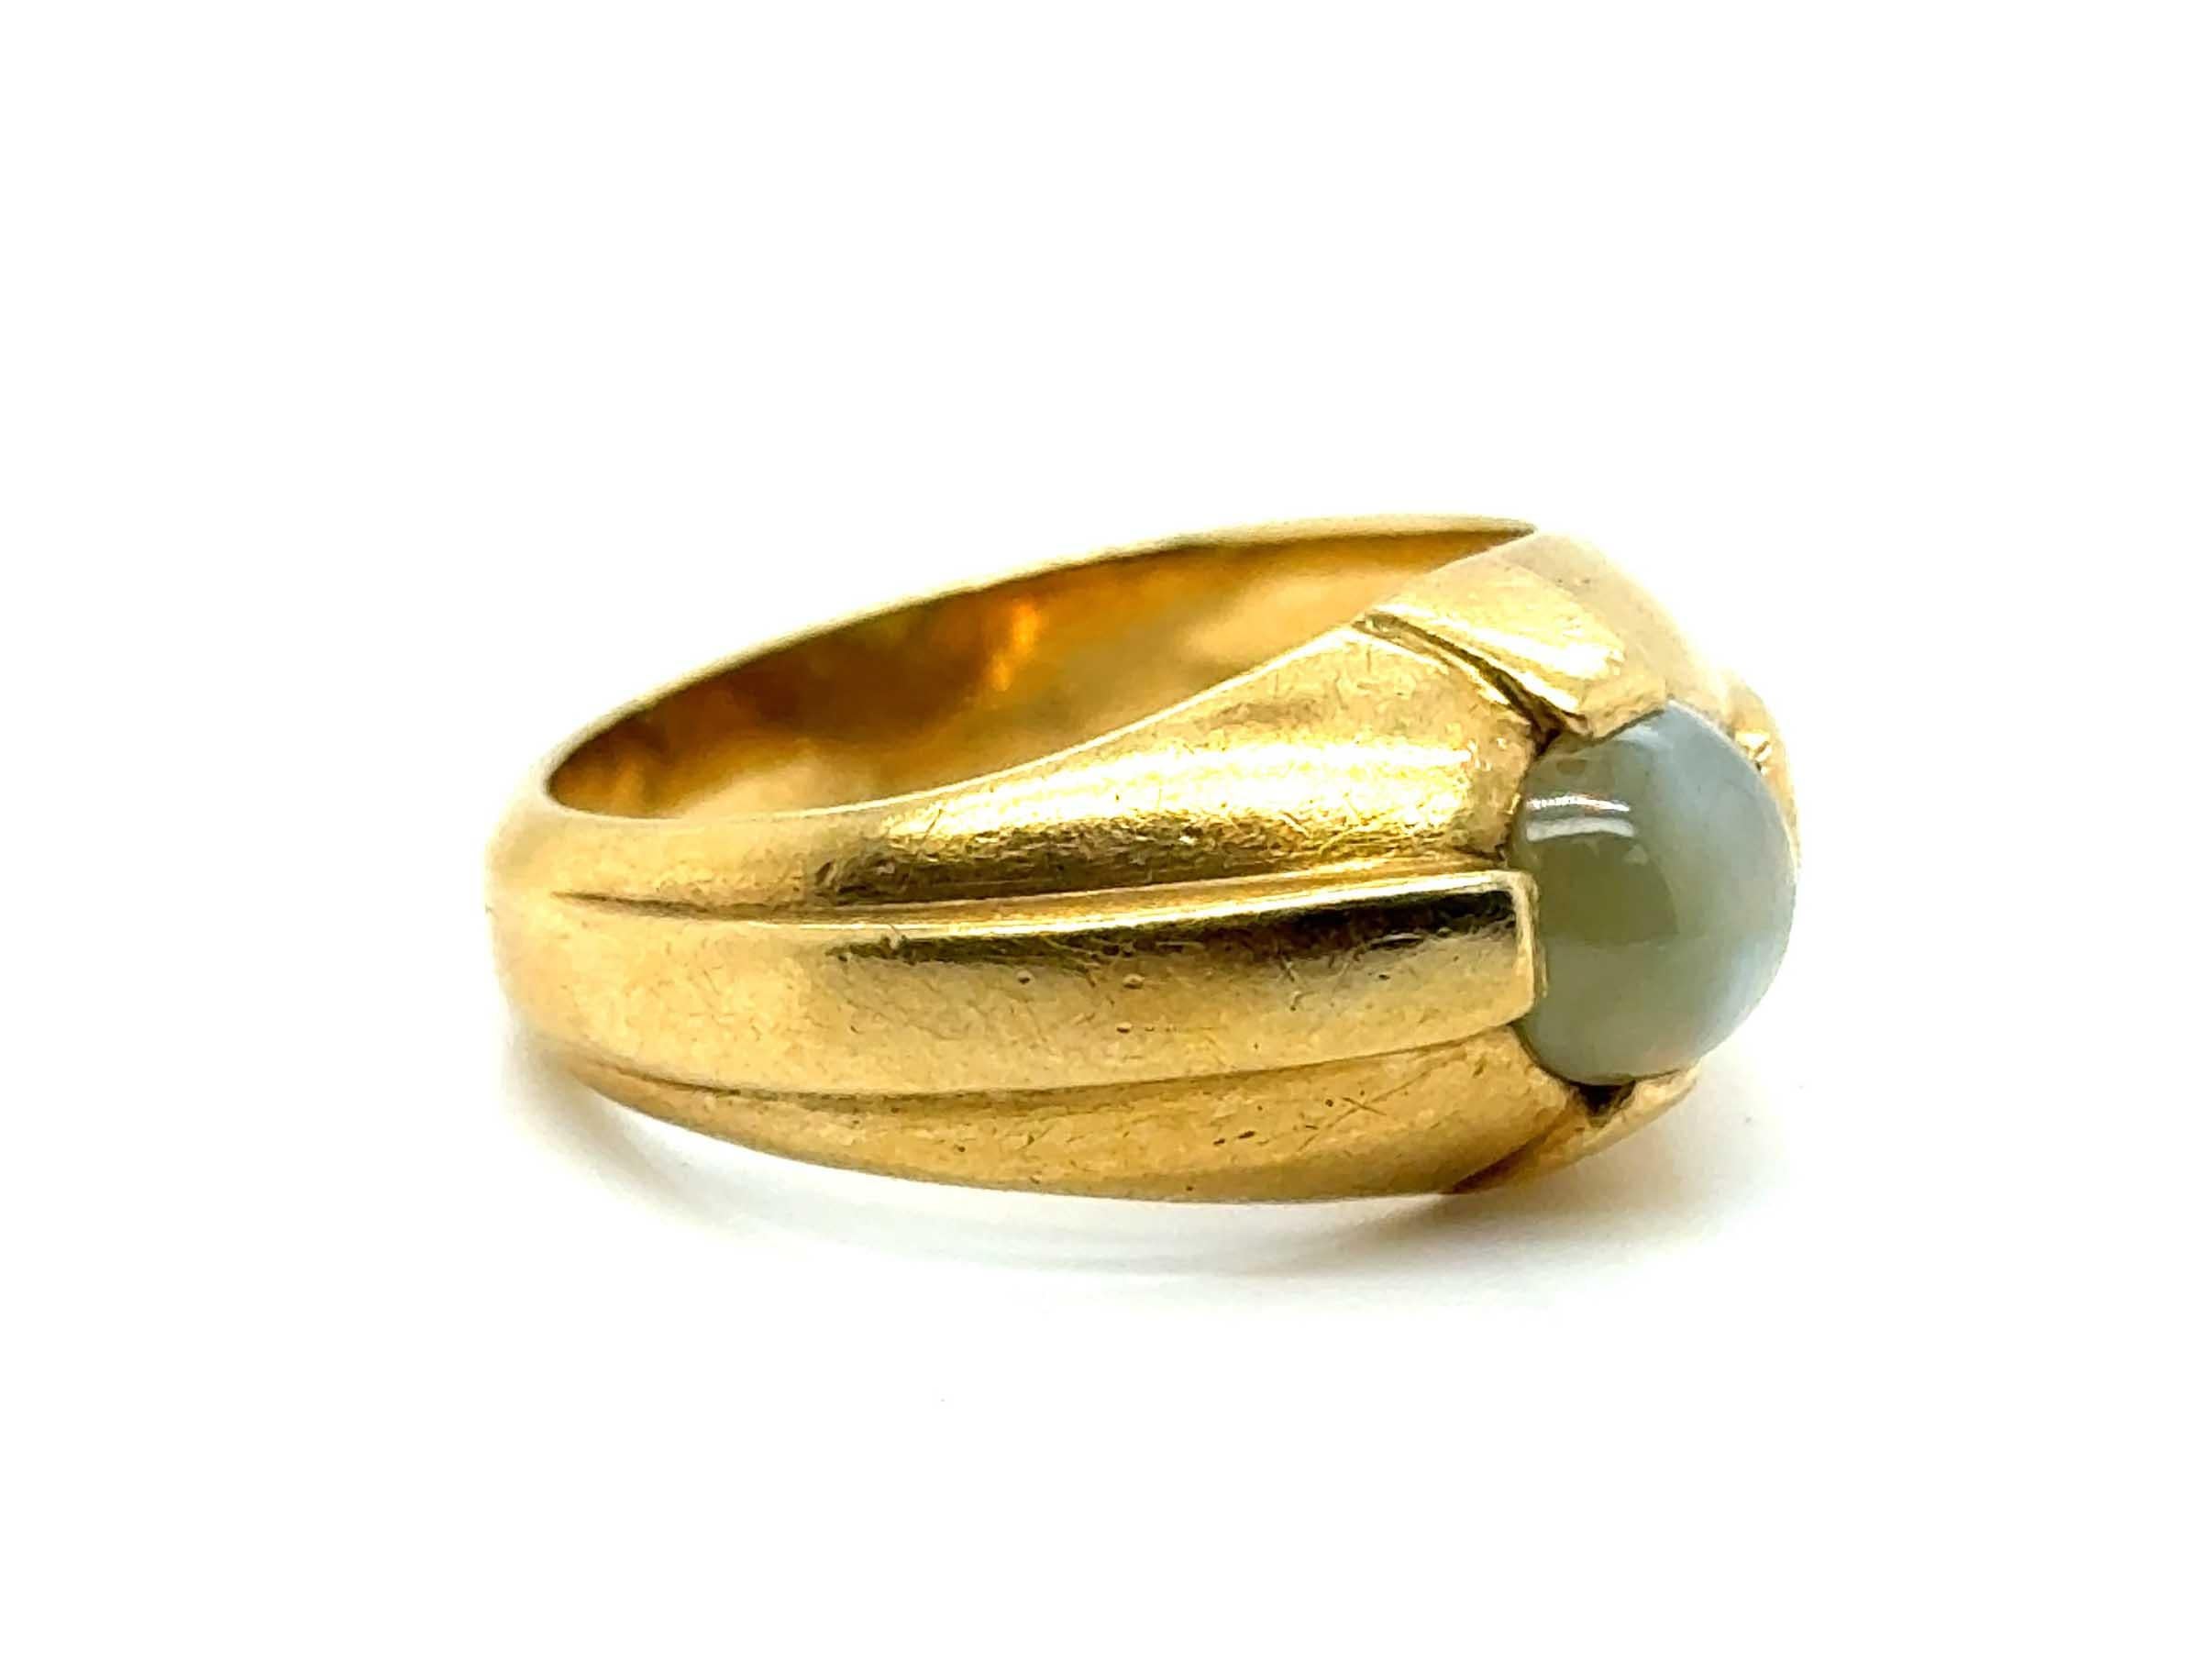 Genuine Original Antique from 1960's Retro Cat's Eye Mens Unisex Ring 18K Yellow Gold


Features a Genuine Natural 1ct Chrysoberyl Round Cabochon Cat's Eye Gemstone

Designed for a Man, Can Be Worn by a Man or Woman

Oversized Has Become Extremely